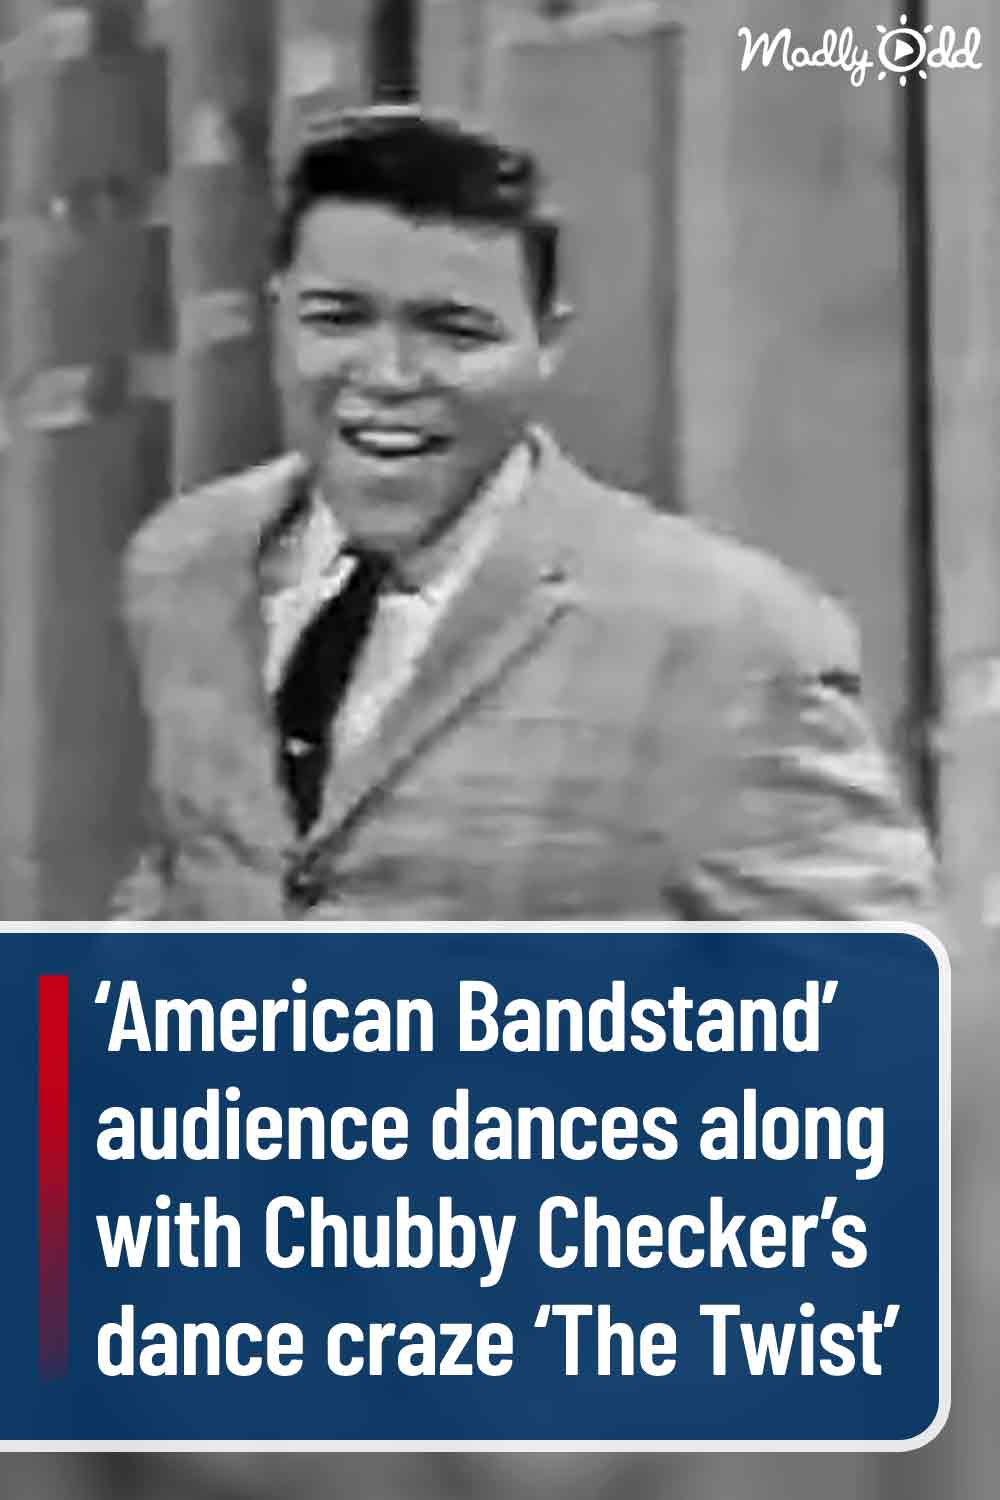 ‘American Bandstand’ audience dances along with Chubby Checker’s dance craze ‘The Twist’